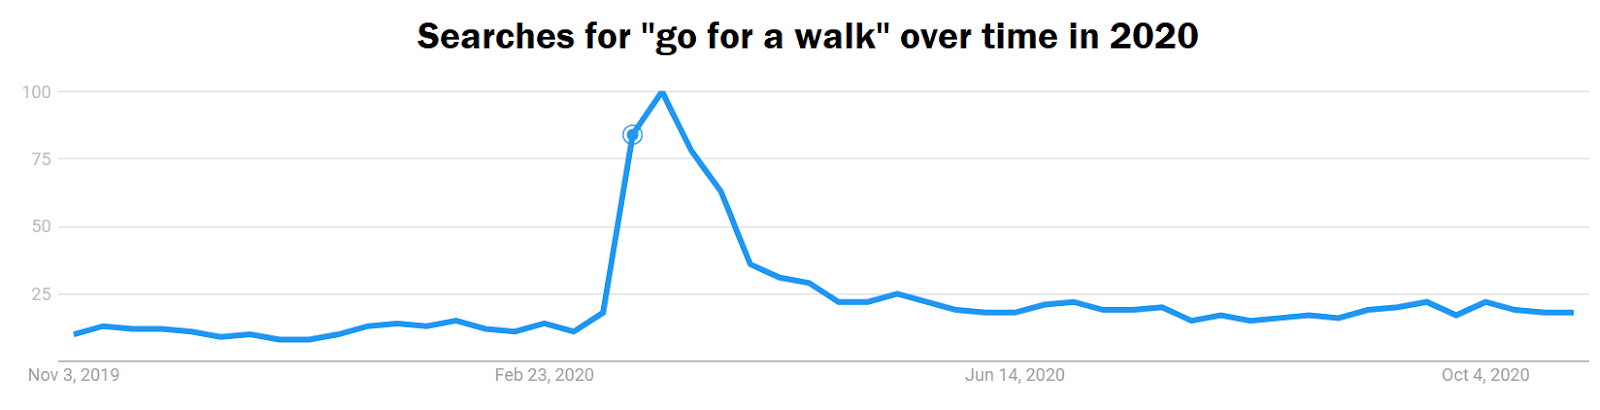 Graph of searches for "go for a walk" over time in 2020. There is a significant spike in spring of 2020.